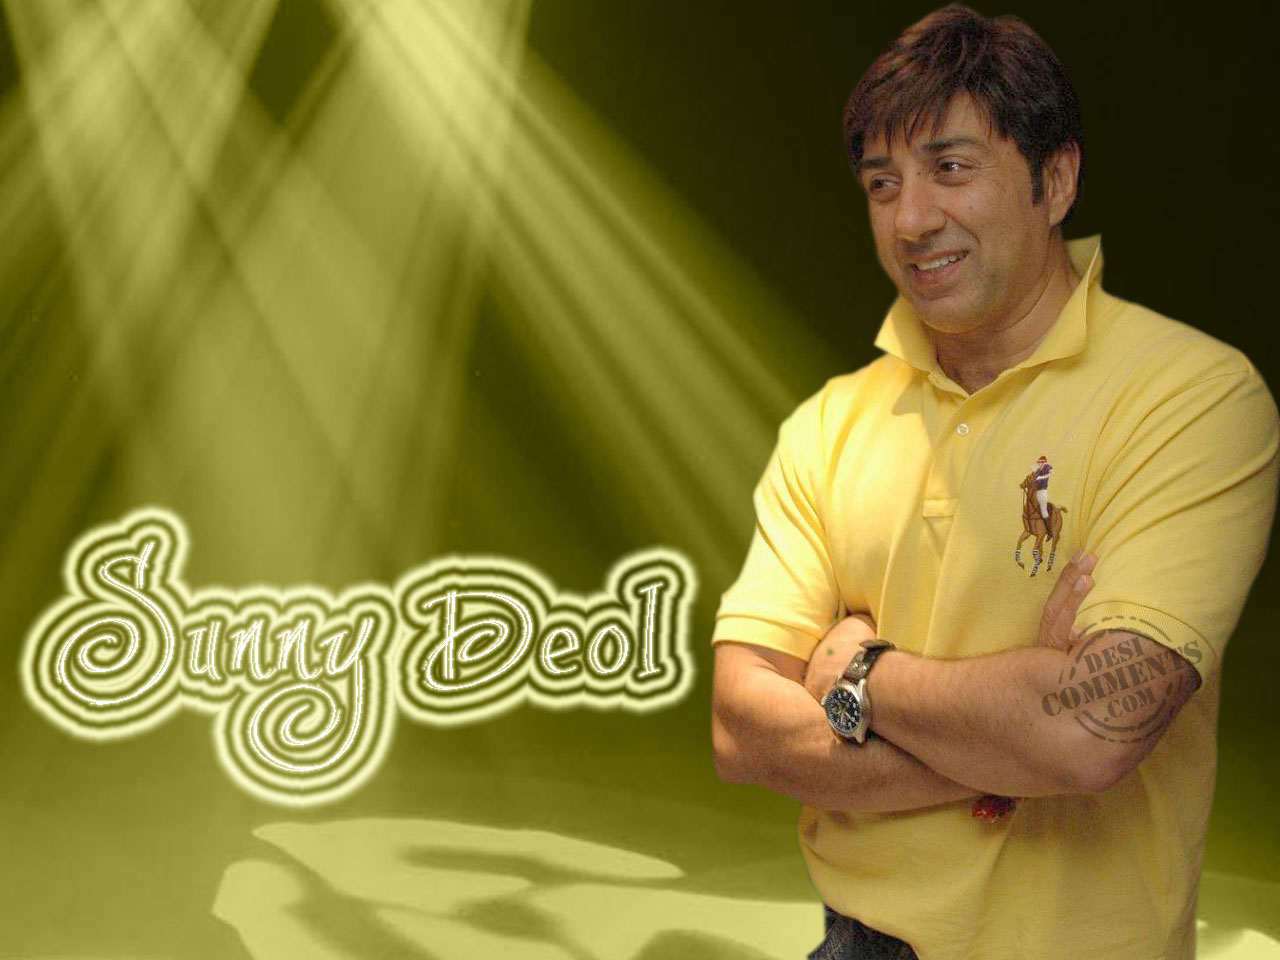 Sunny Deol Image, HD Photo, Biography and Latest News